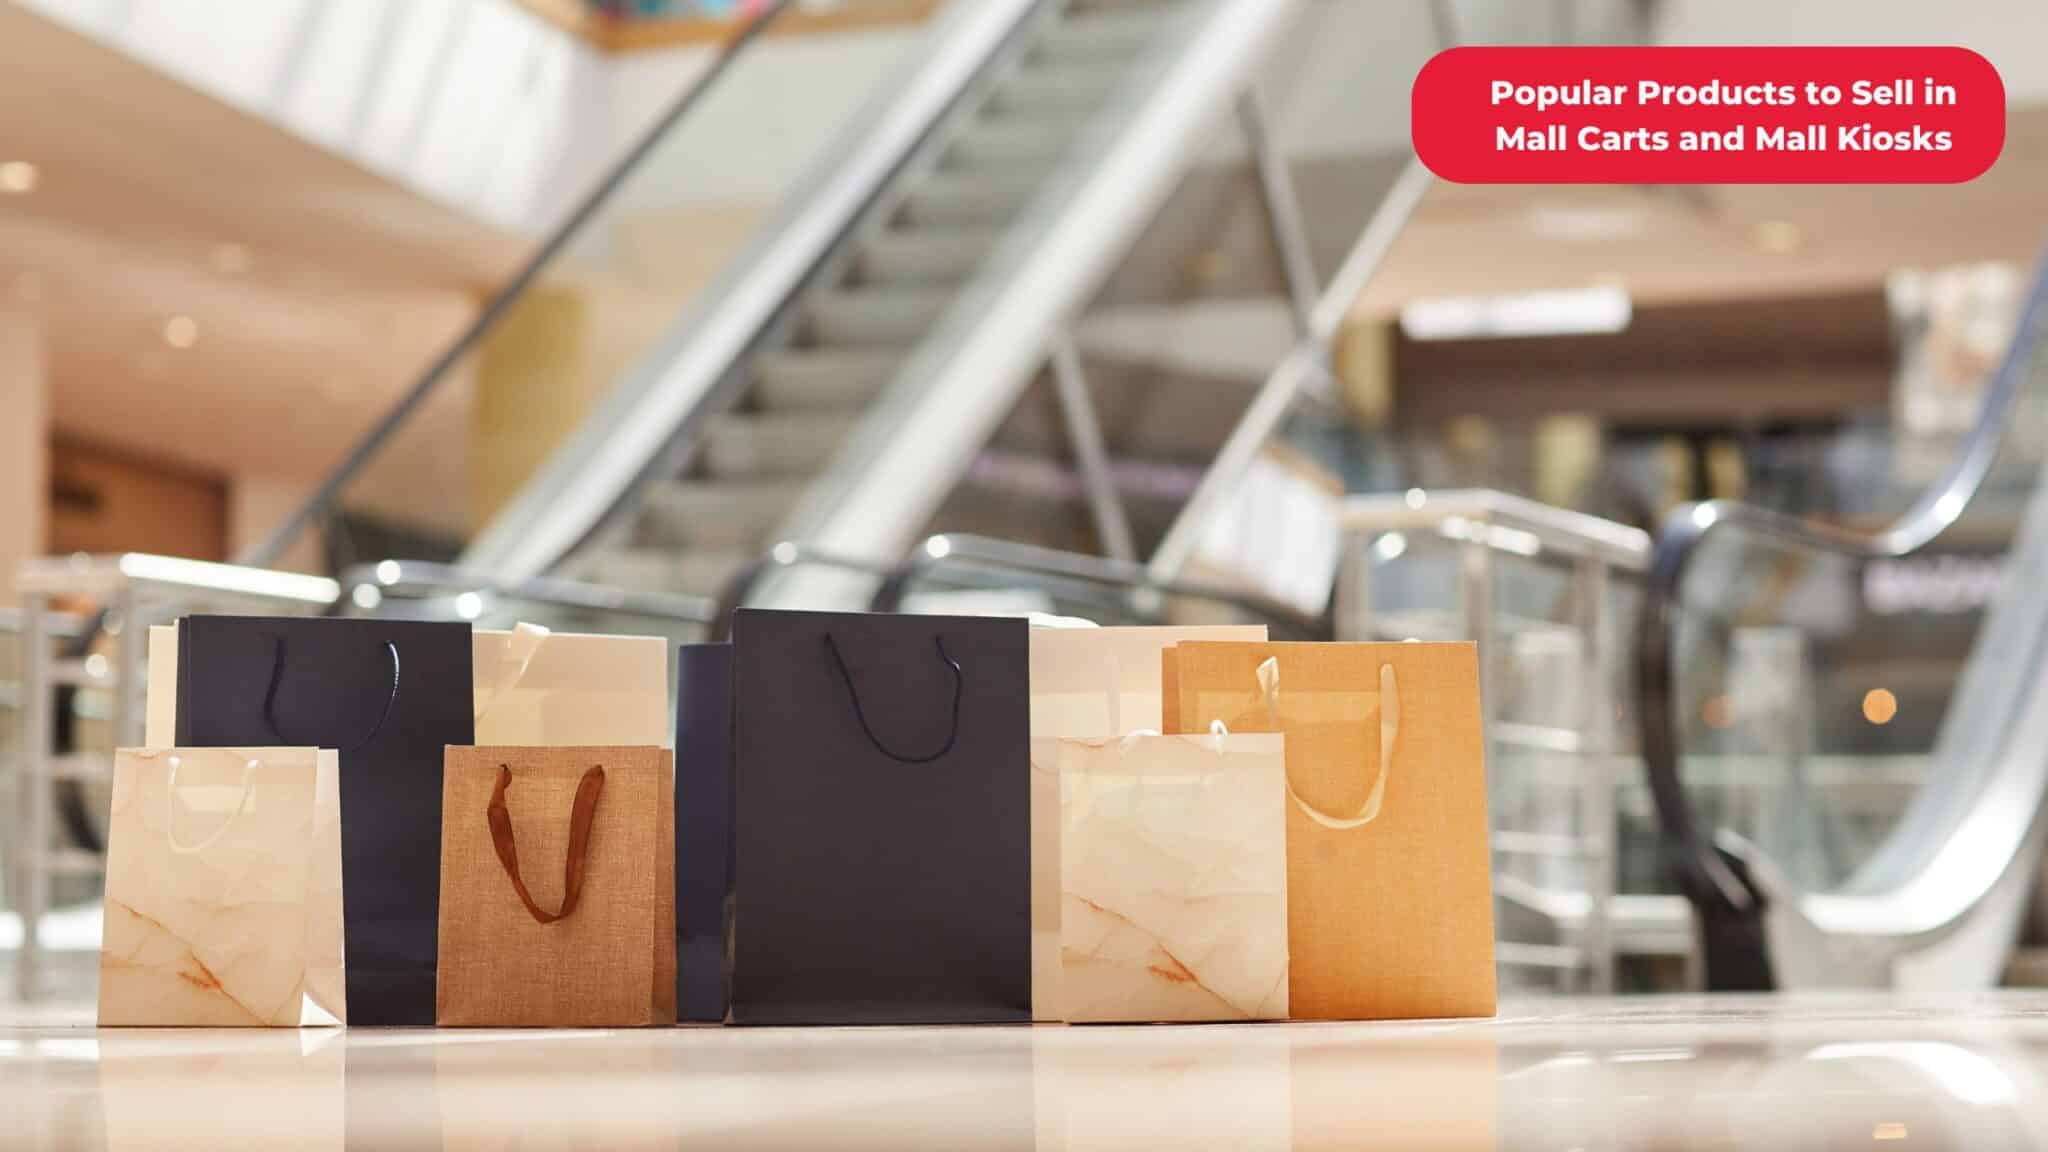 Popular Products to Sell in Mall Carts